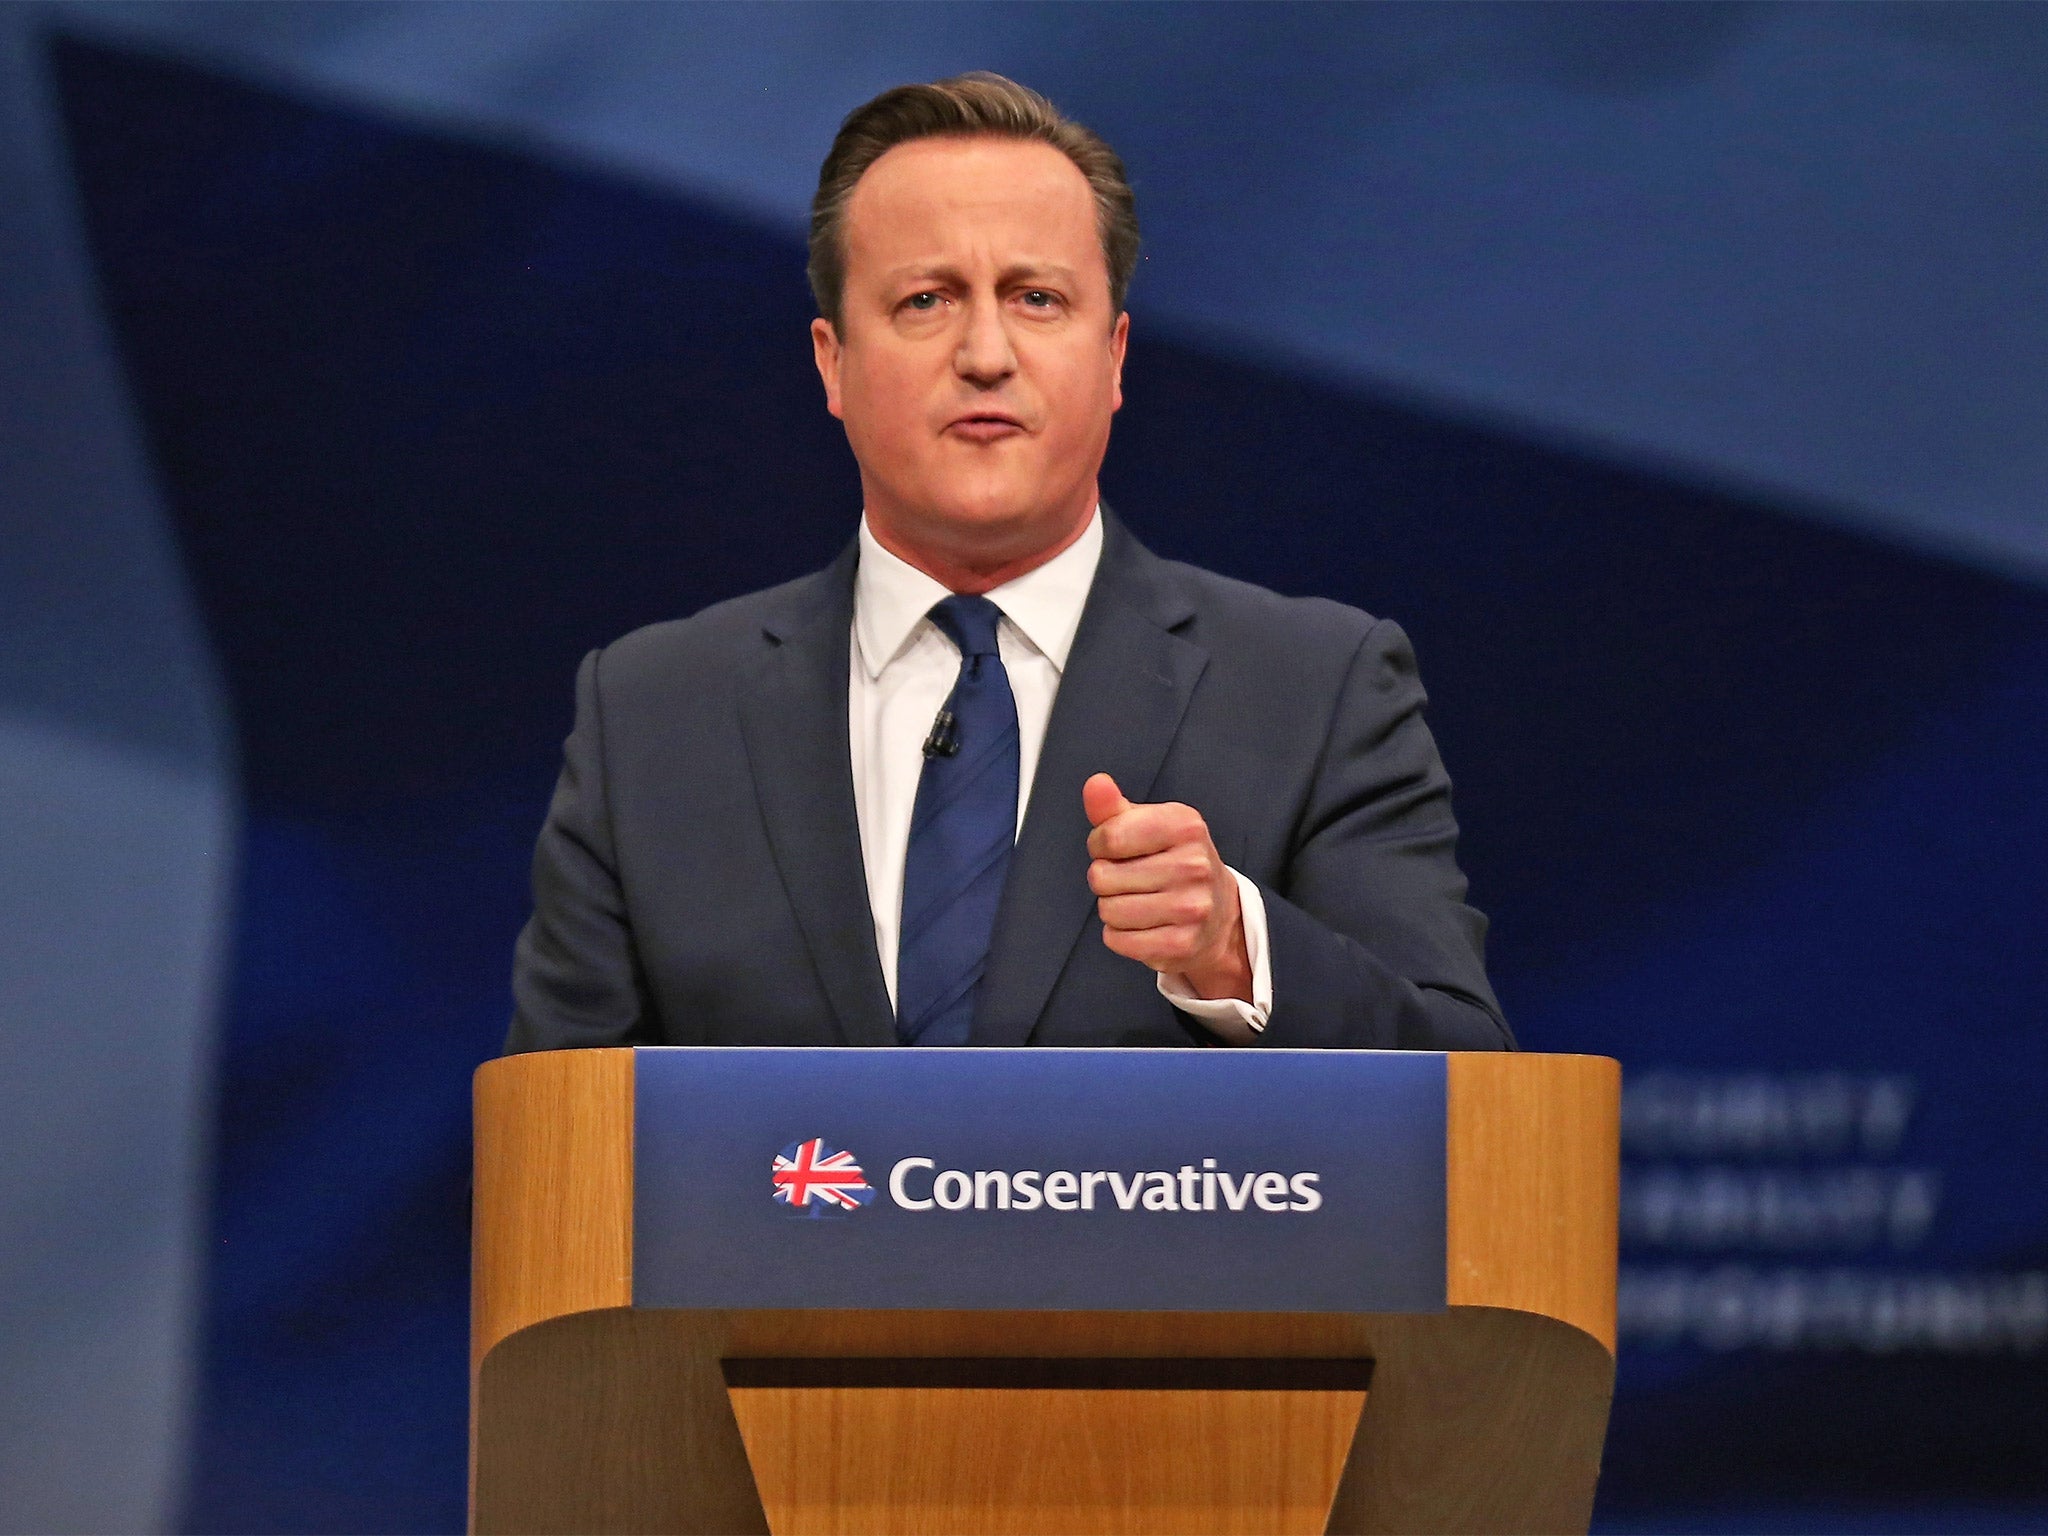 David Cameron gives his keynote speech to delegates on the final day of the Conservative Party Conference